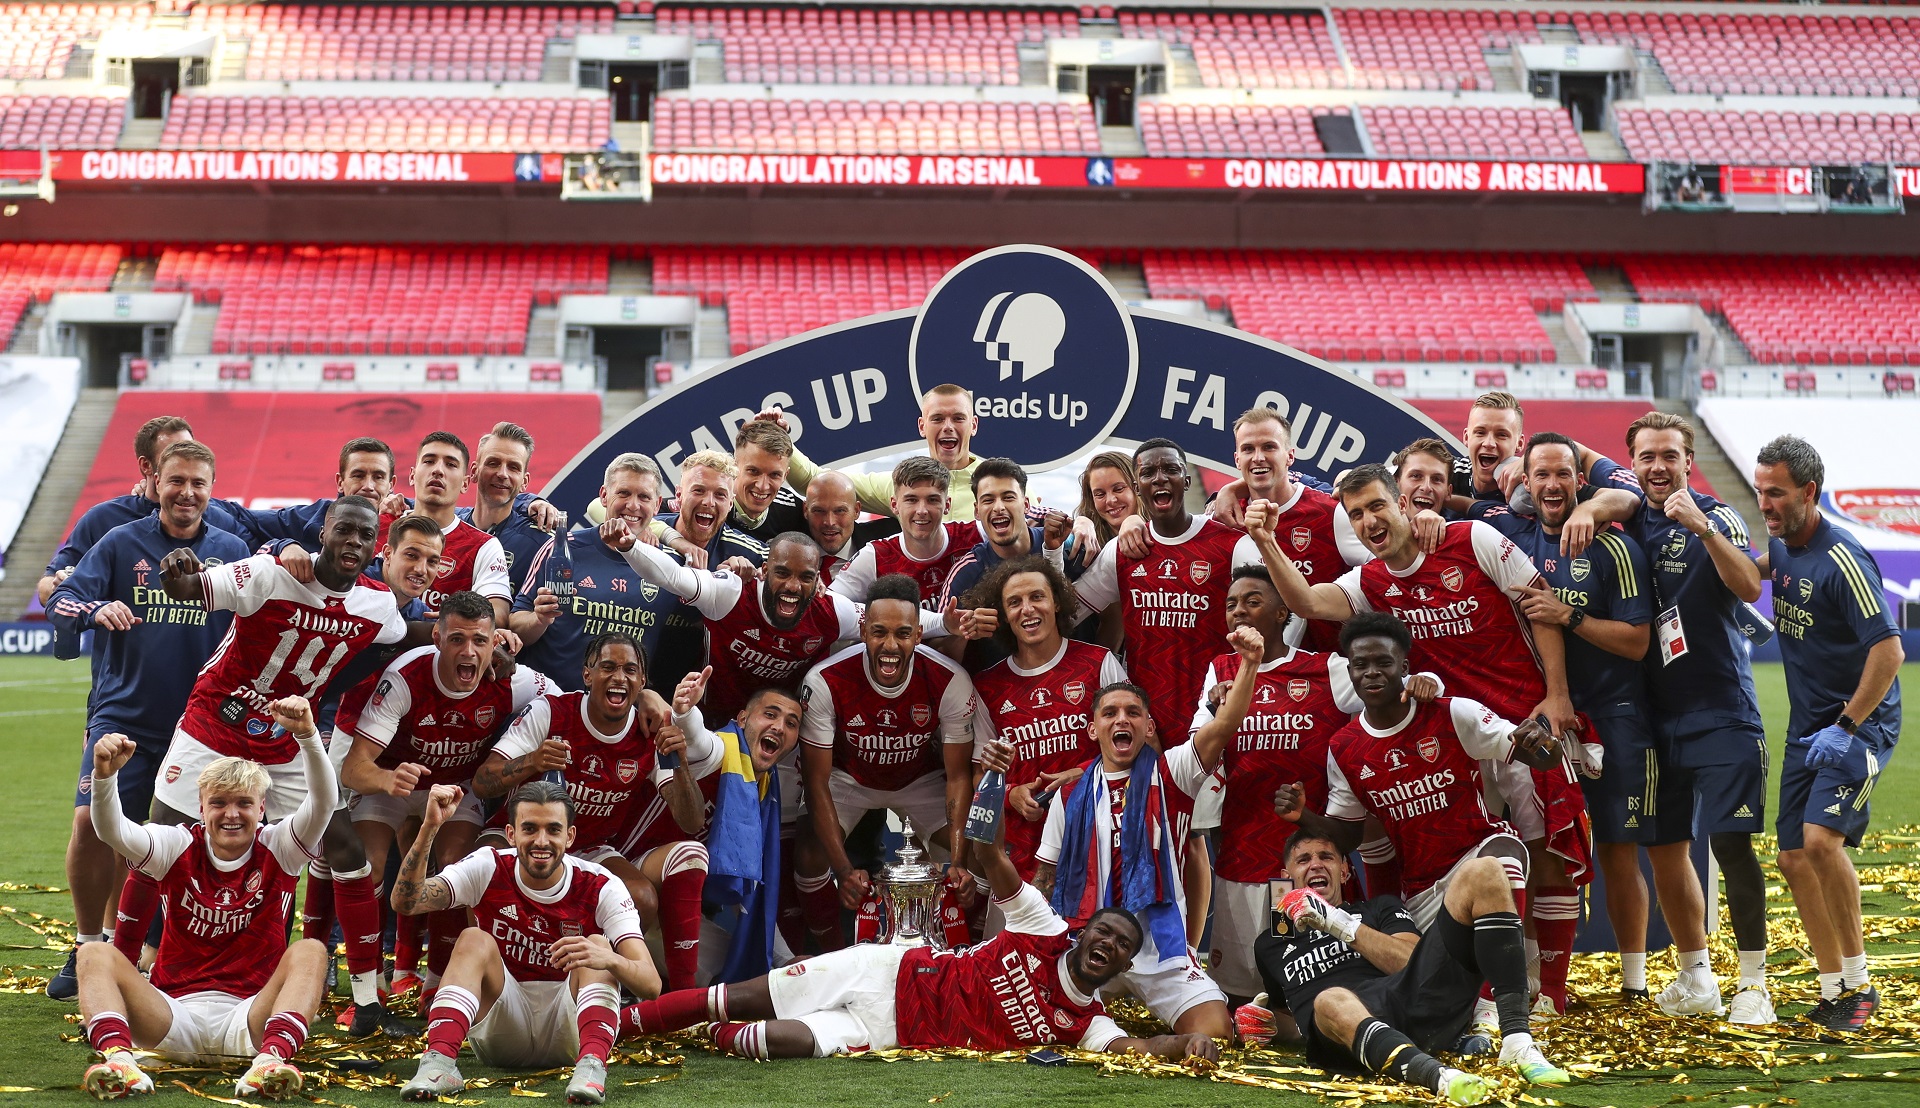 epa08579543 Arsenal's players celebrate with the trophy after the English FA Cup final between Arsenal London and Chelsea FC at Wembley stadium in London, Britain, 01 August 2020.  EPA/Cath Ivill/NMC/Pool EDITORIAL USE ONLY. No use with unauthorized audio, video, data, fixture lists, club/league logos or 'live' services. Online in-match use limited to 120 images, no video emulation. No use in betting, games or single club/league/player publications.